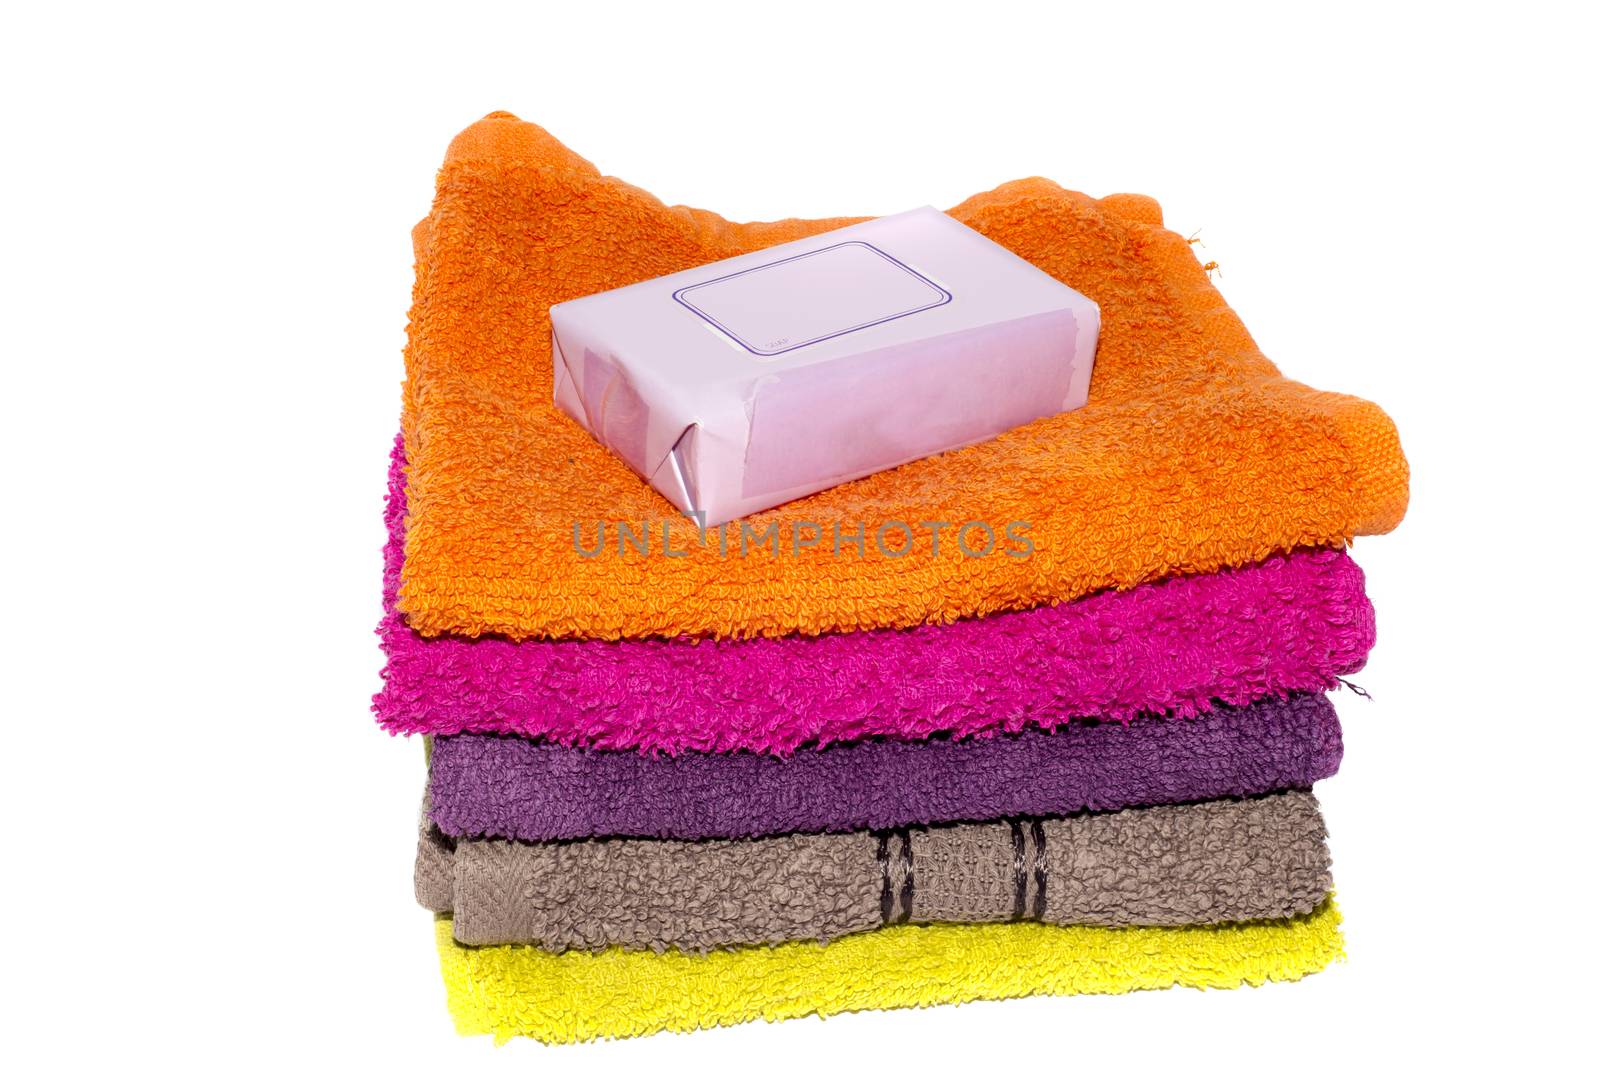 soap on top of facecloths of various shades